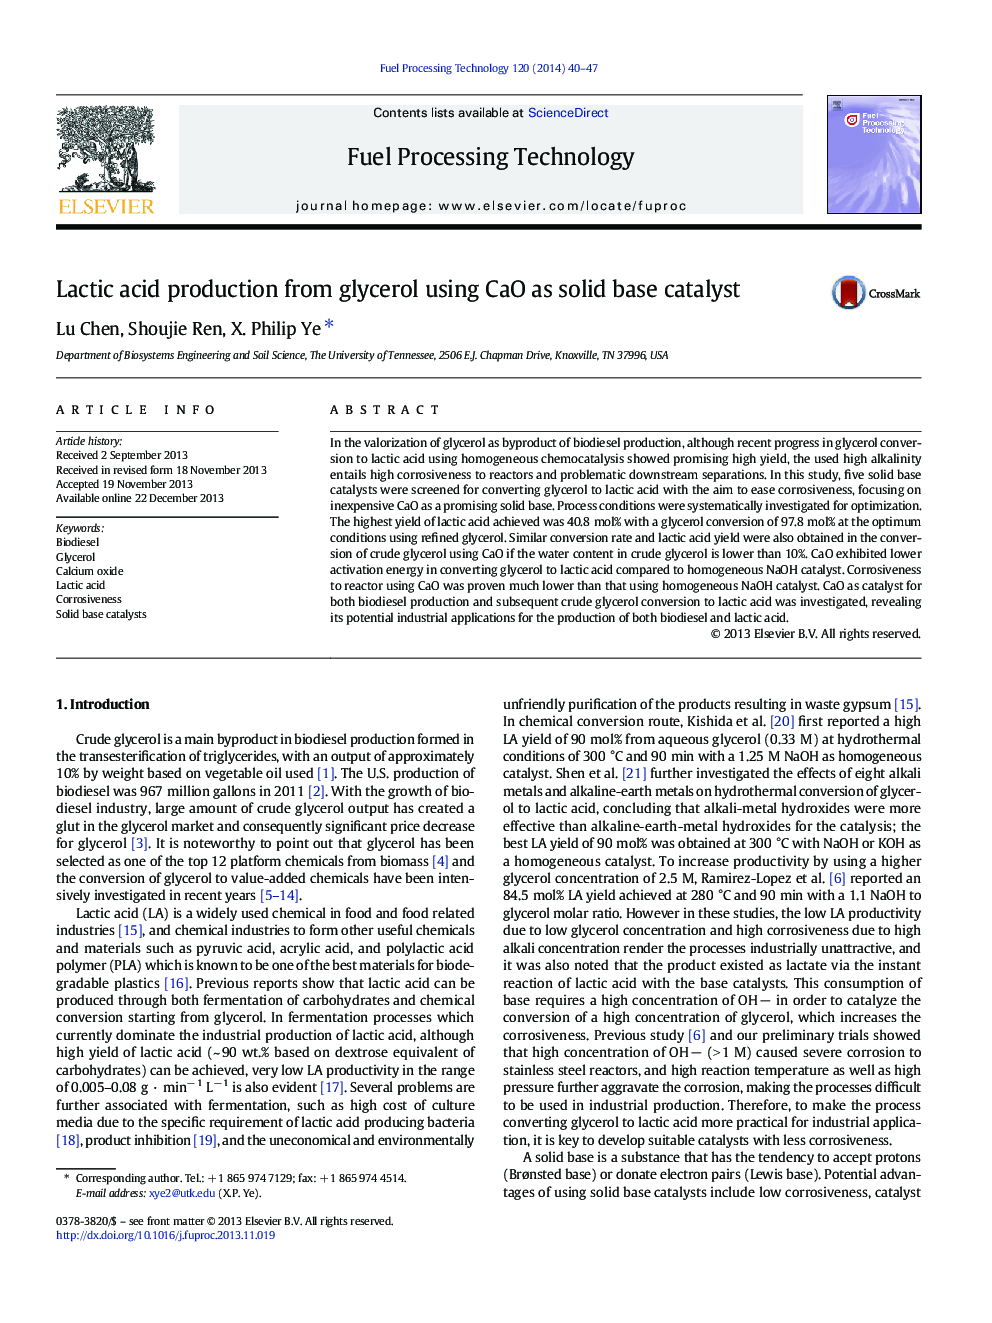 Lactic acid production from glycerol using CaO as solid base catalyst